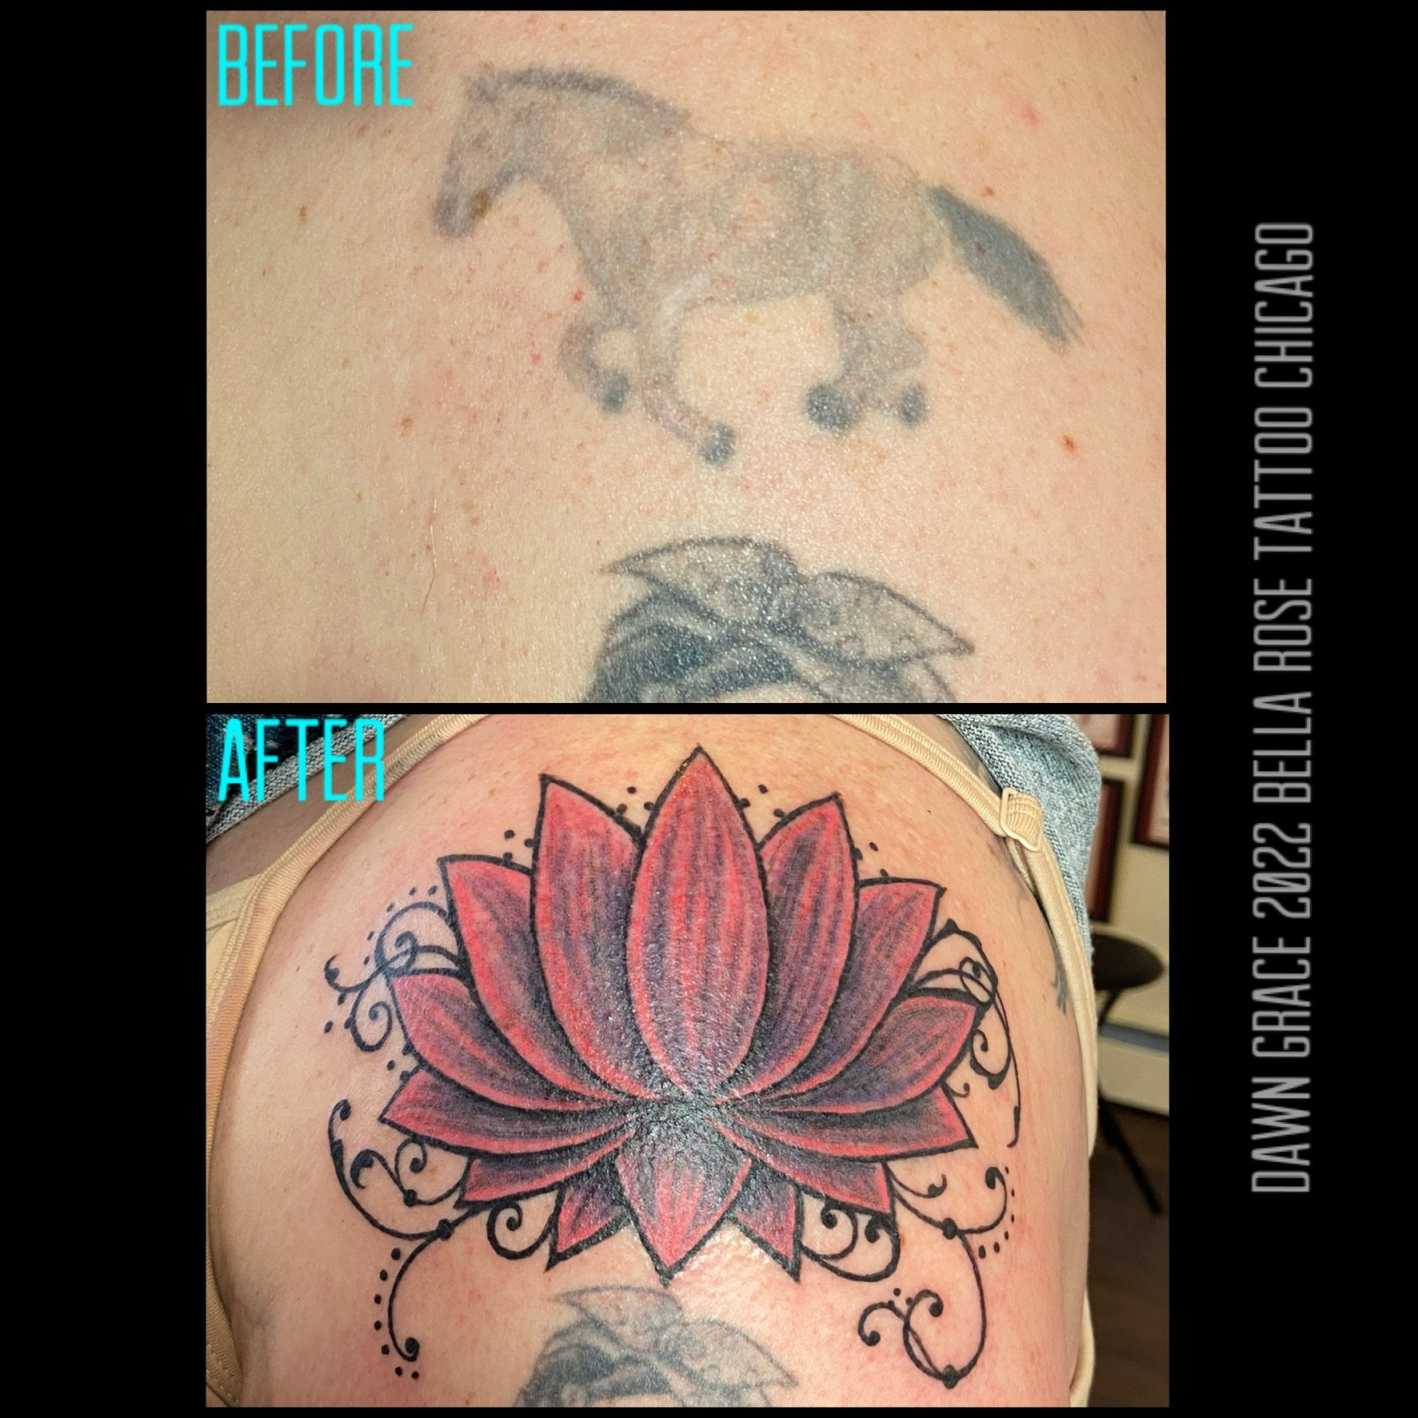 cover-ups & reworked tattoos — bella rose tattoo